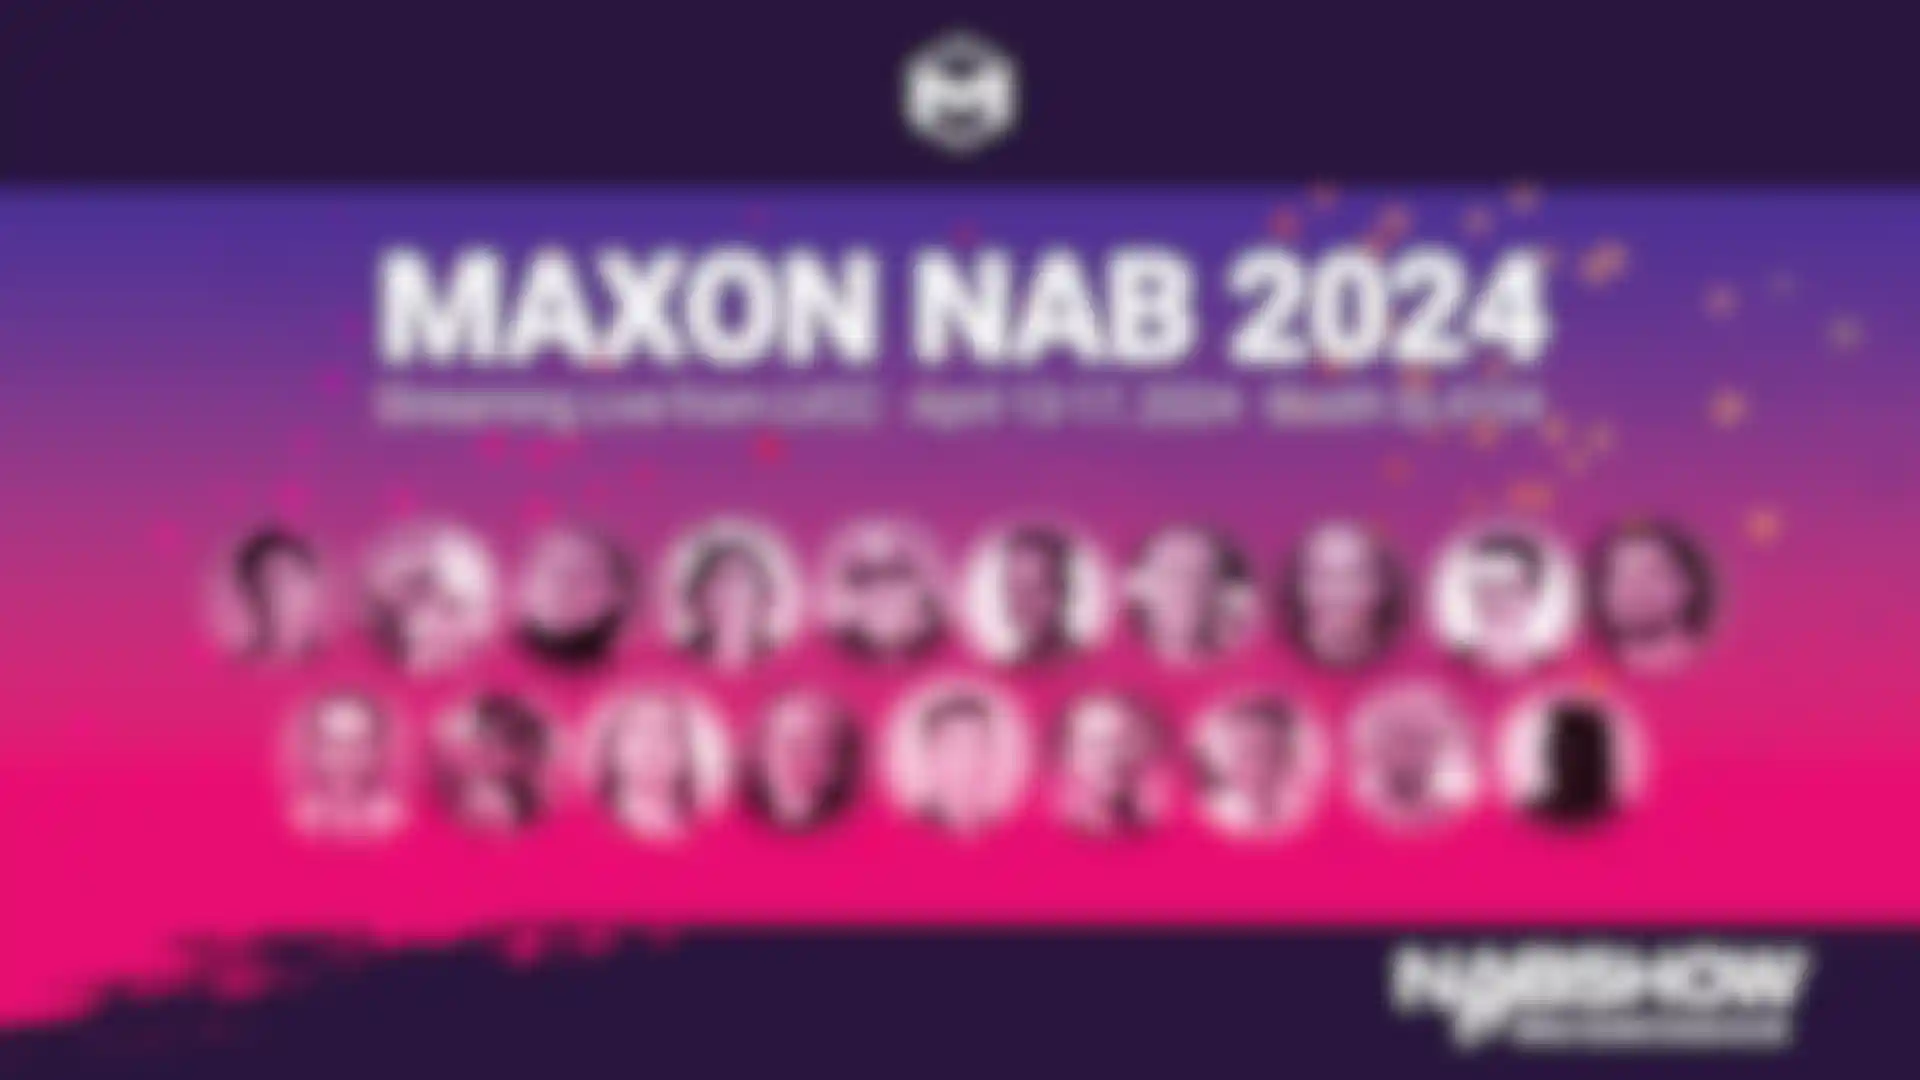 Join Maxon for NAB 2024 image